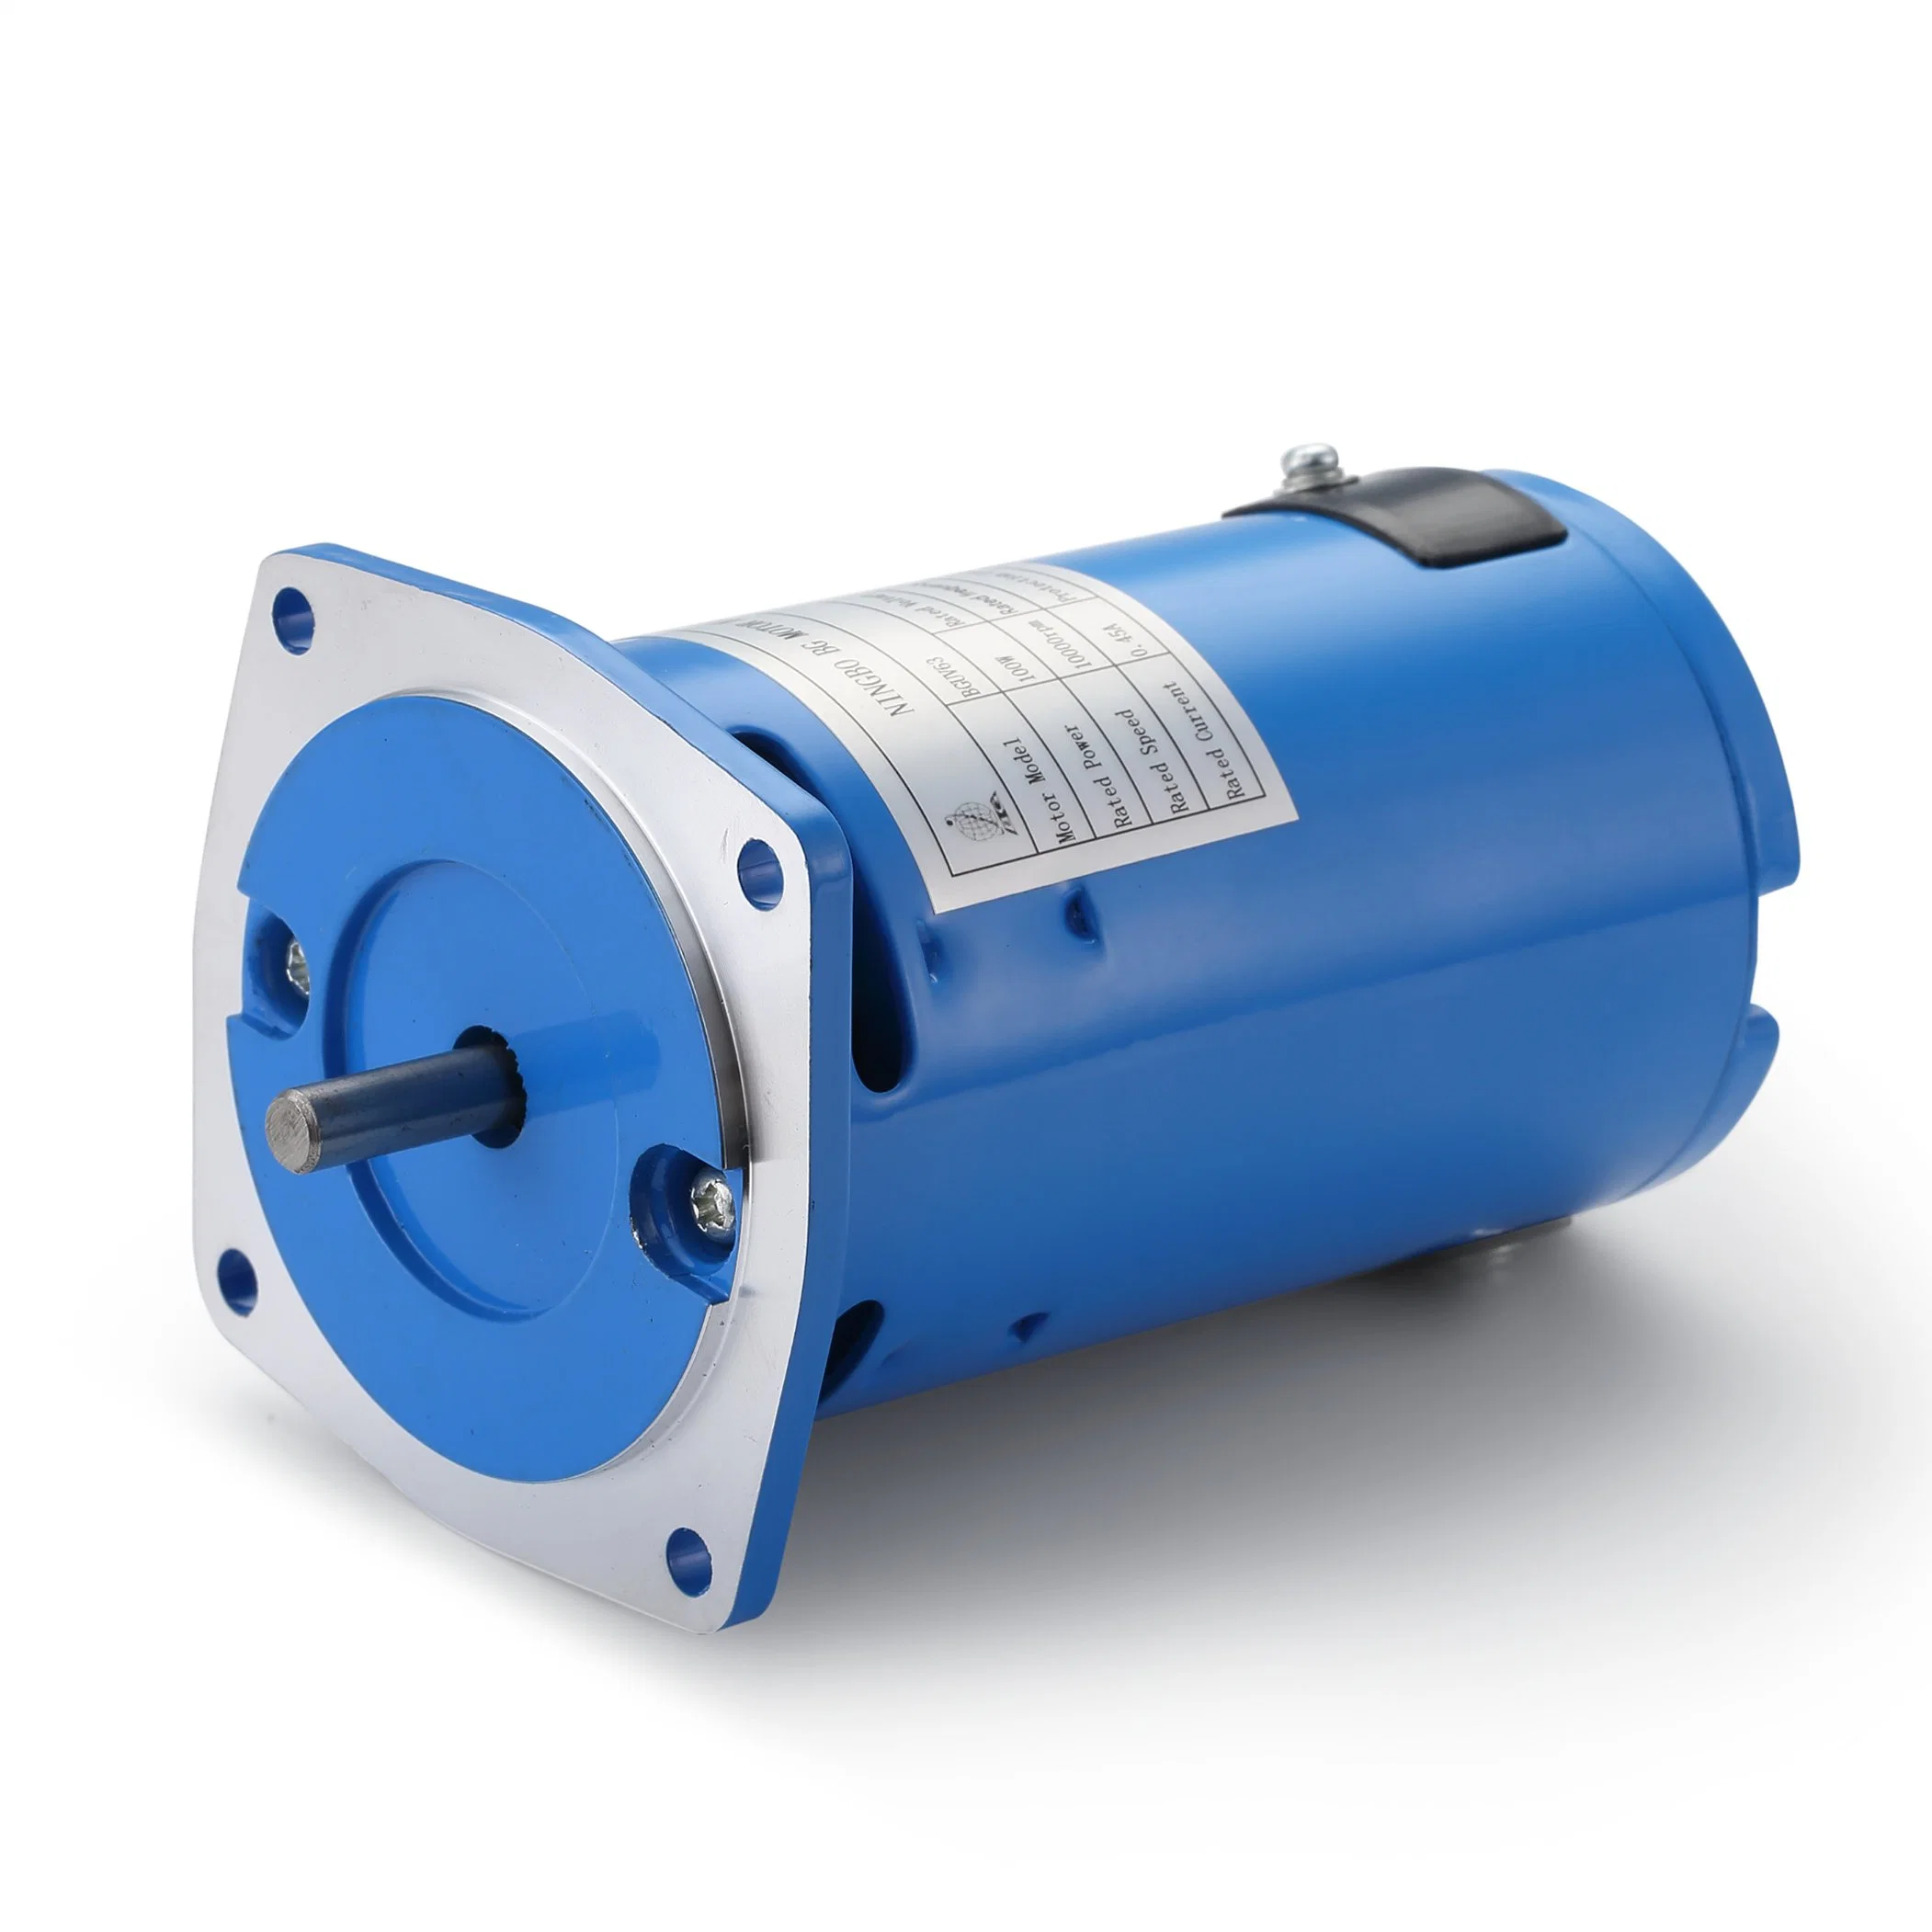 Universal Use AC 65 Motor Electric 110/220V Speed Control High Quality Multi-Function Motor